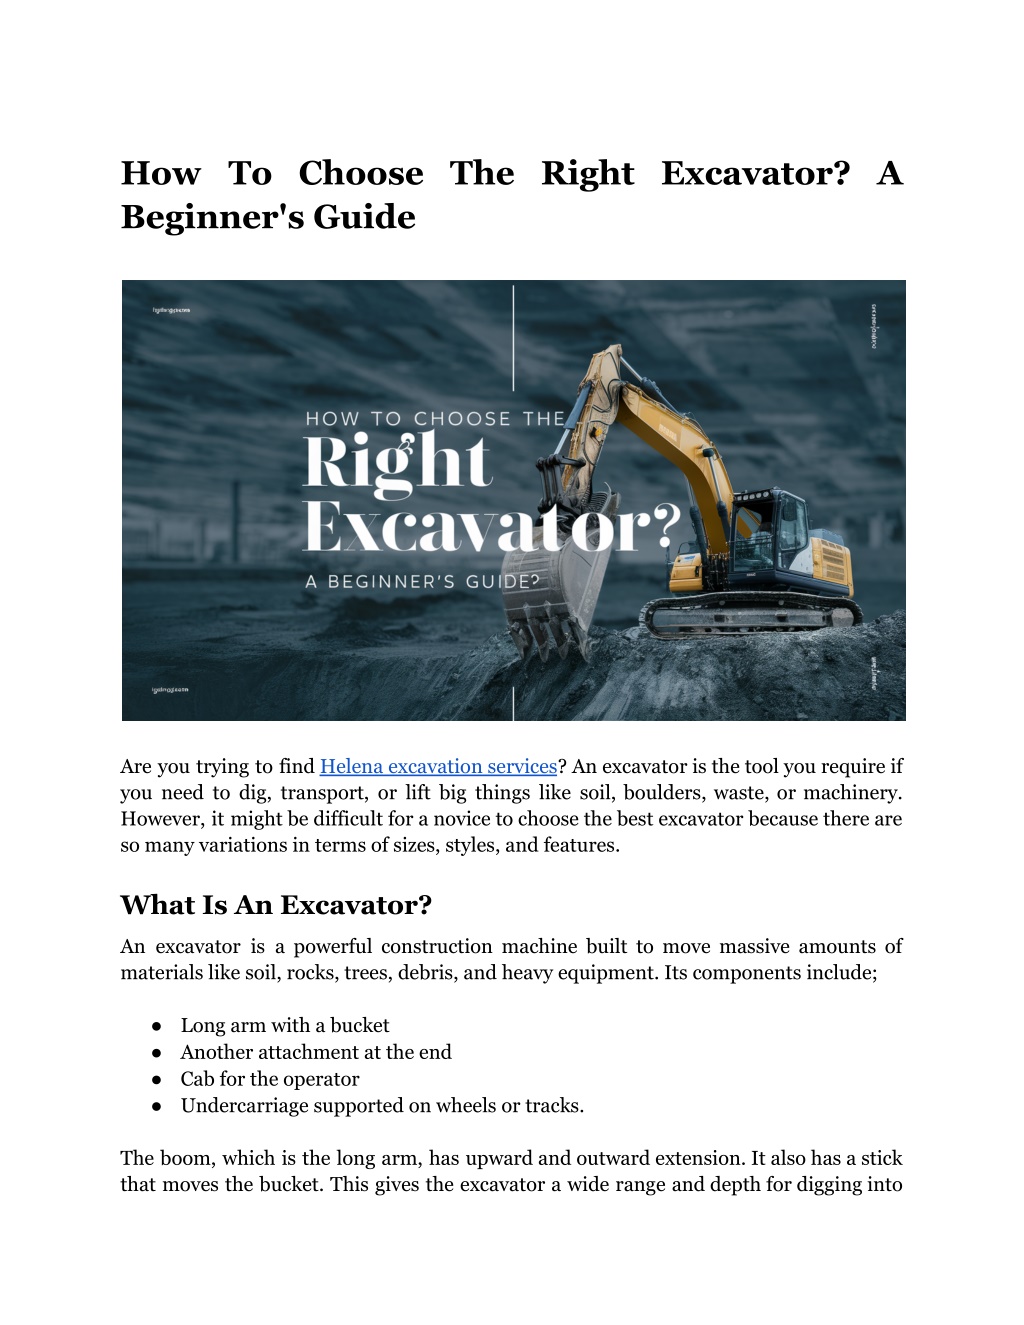 how to choose the right excavator a beginner l.w